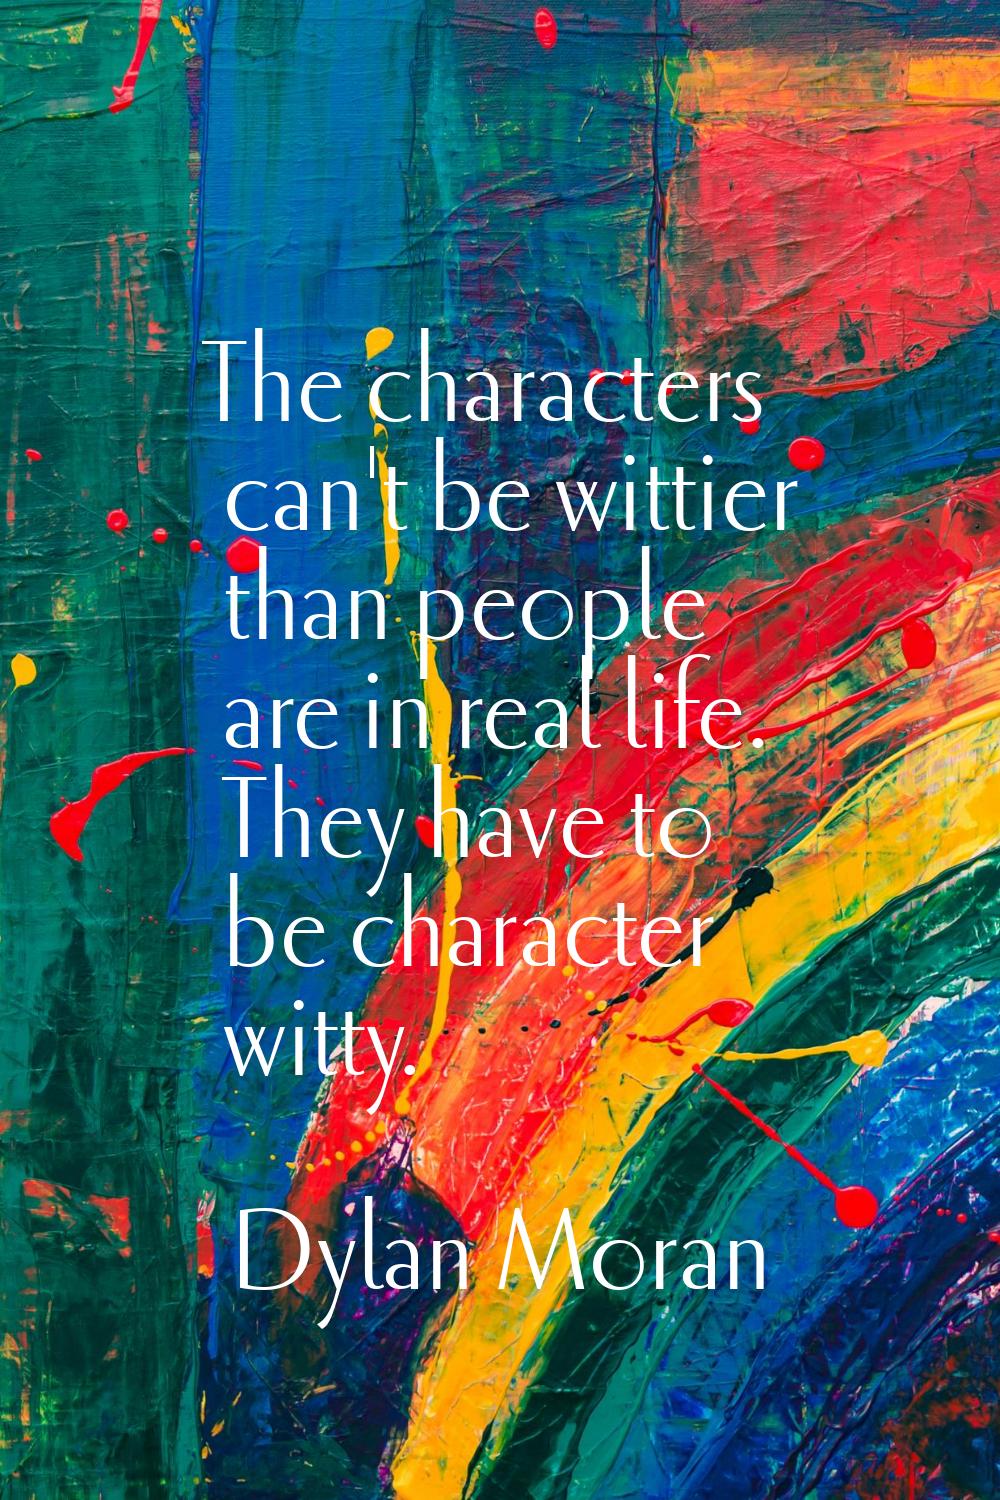 The characters can't be wittier than people are in real life. They have to be character witty.